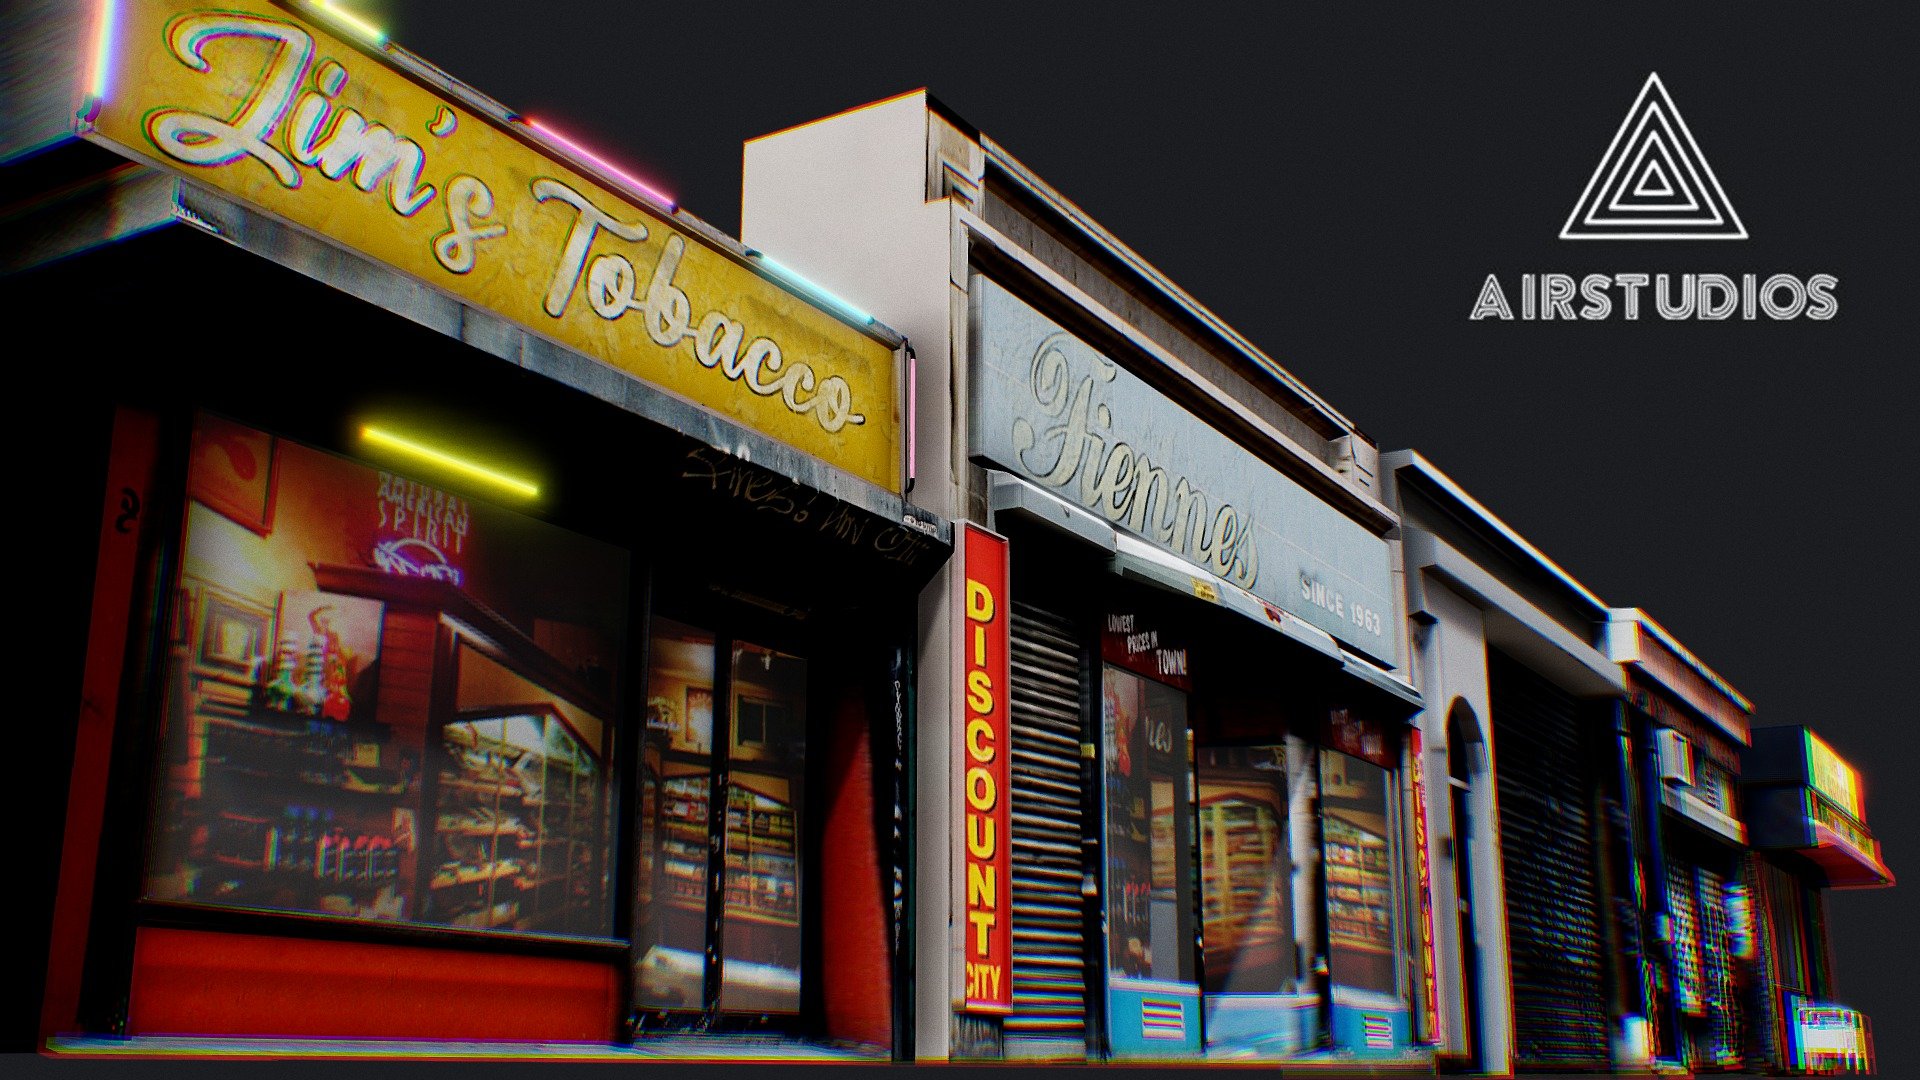 Store Fronts - 4 Pack - Store Fronts - 4 Pack - Buy Royalty Free 3D model by AirStudios (@sebbe613) 3d model